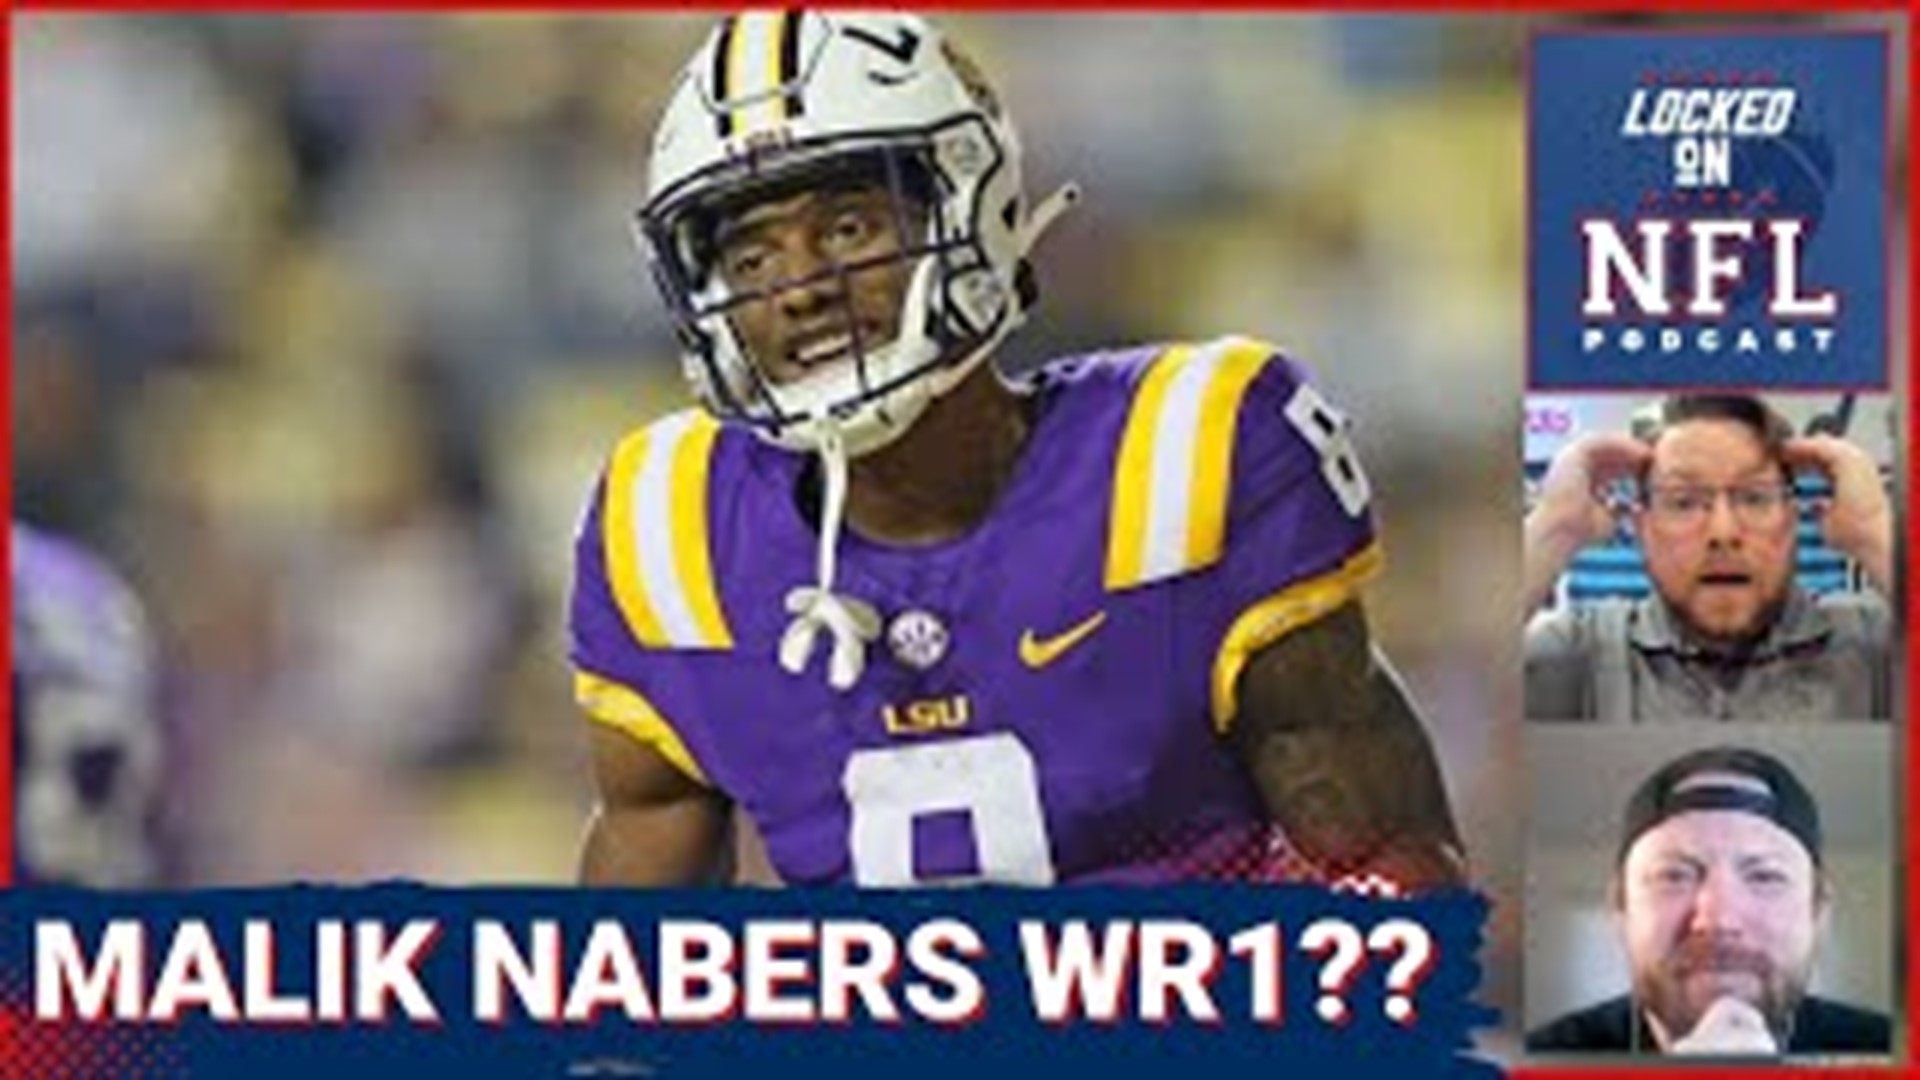 LSU had their Pro Day on Wednesday and Malik Nabers BALLED OUT. Will this performance push Nabers to be the first receiver drafted in April?